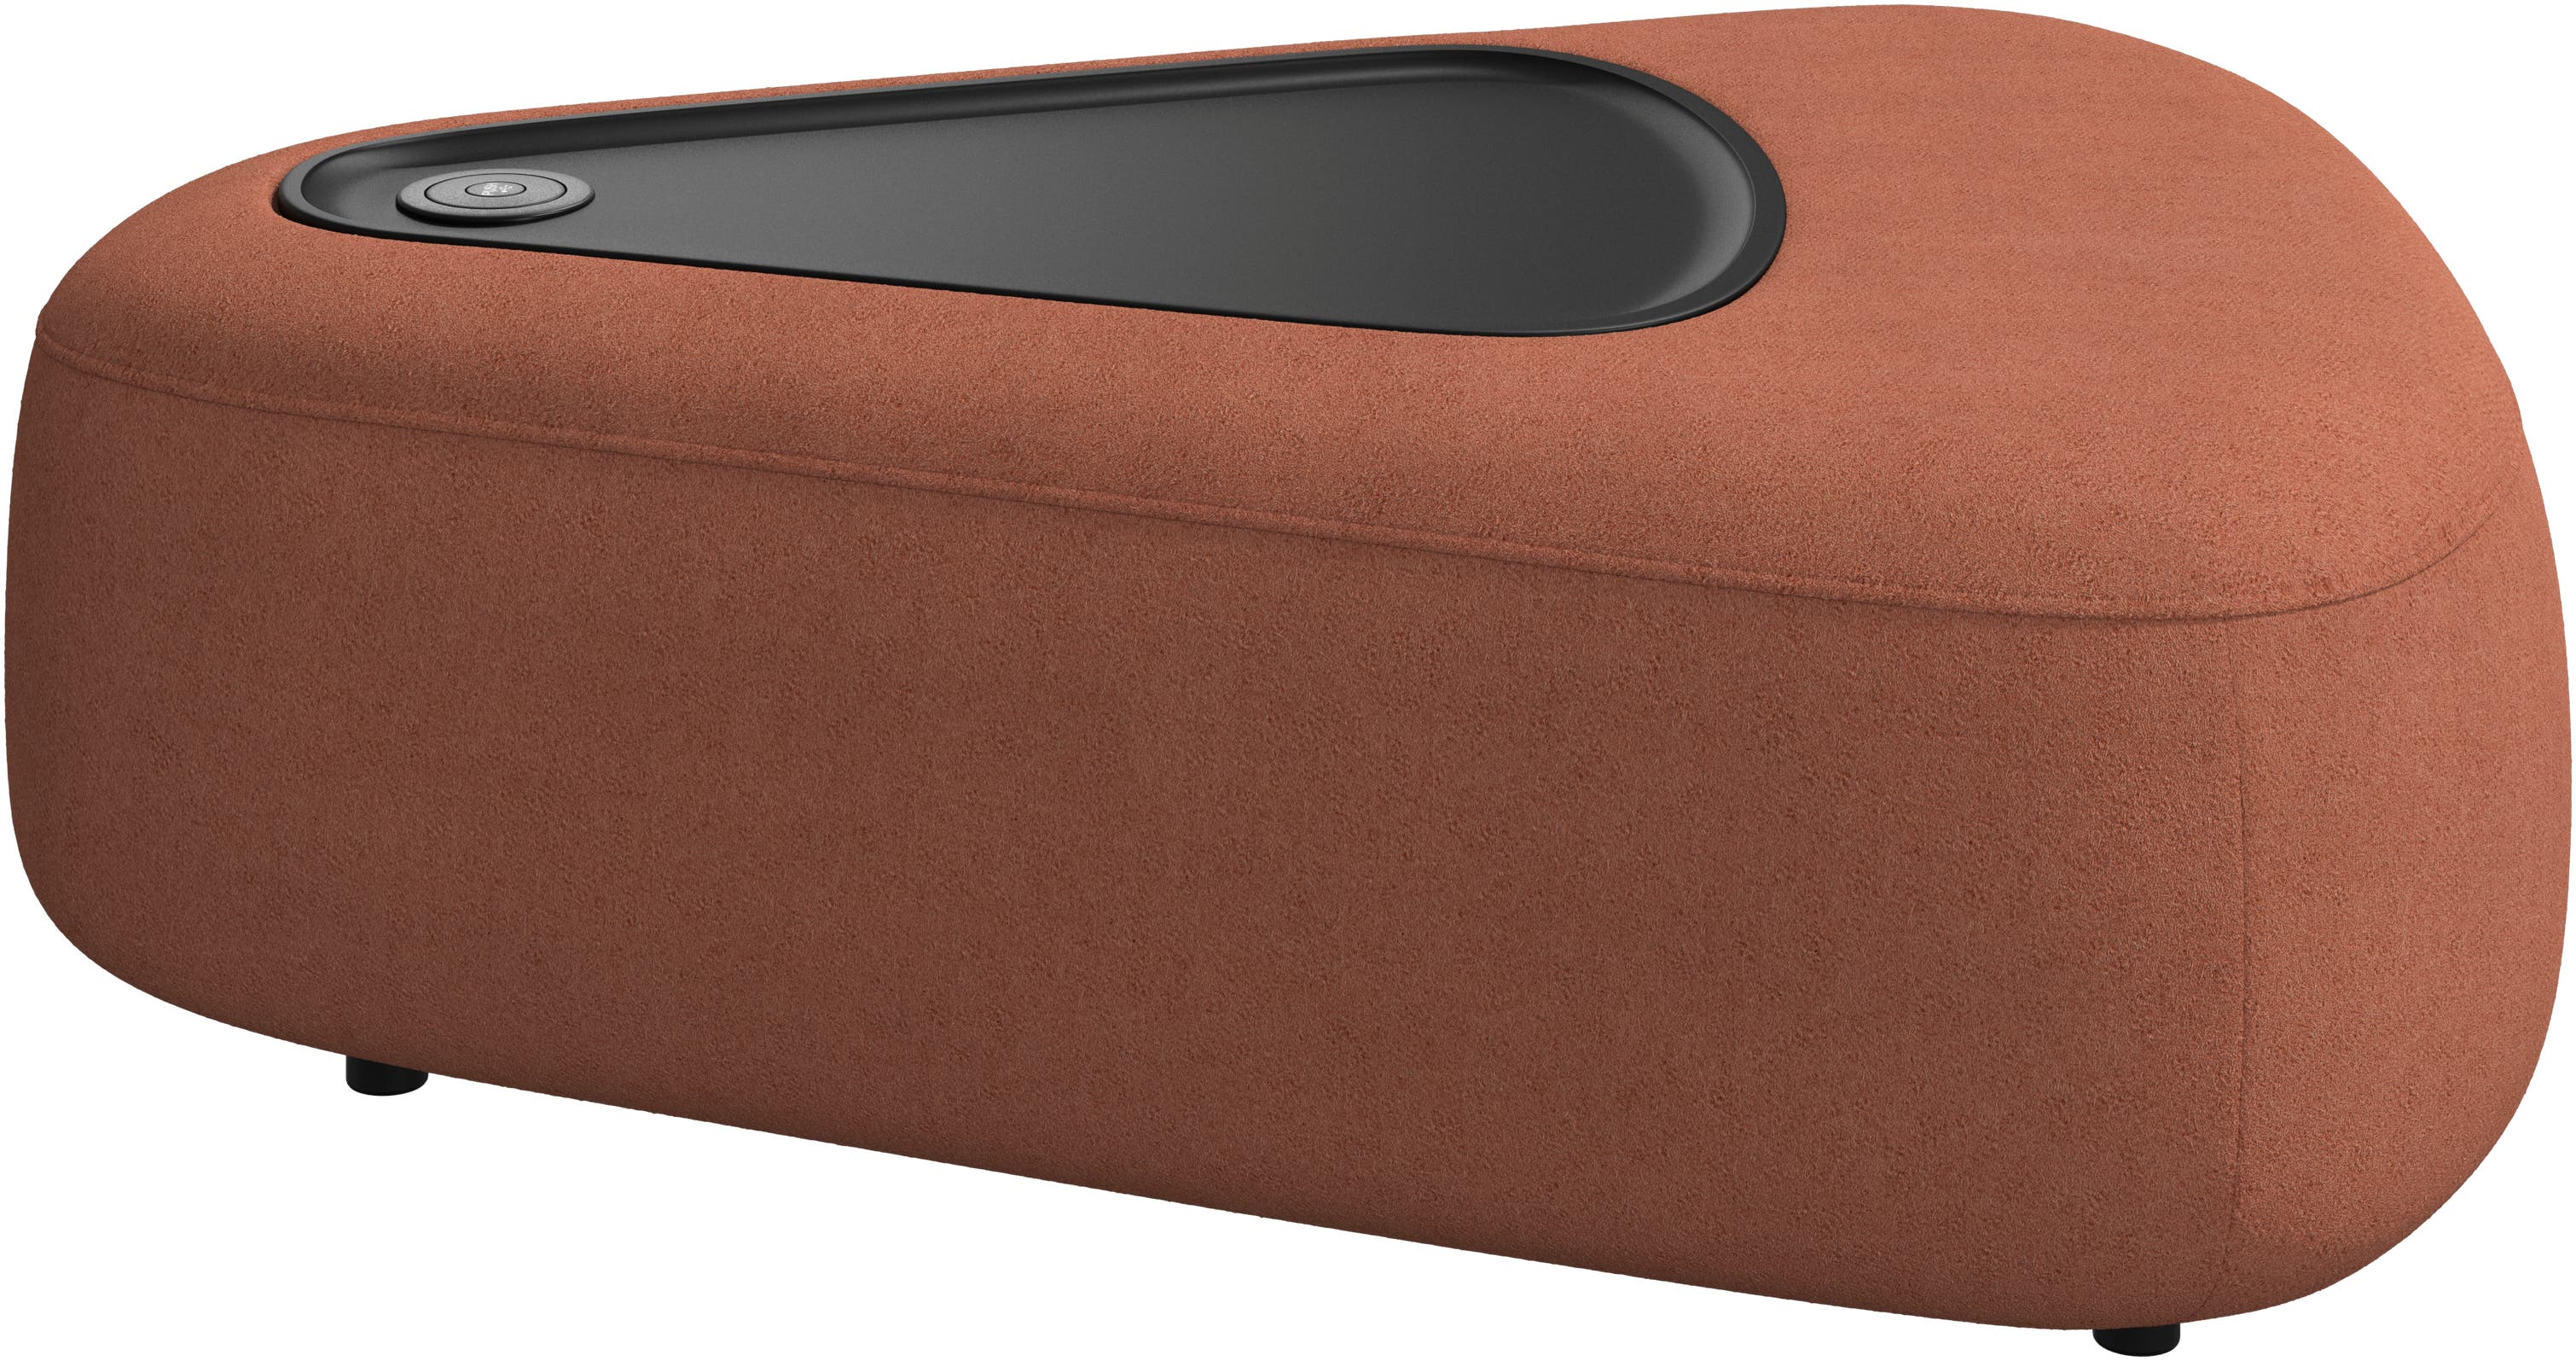 Ottawa triangular pouf with tray with USB charger